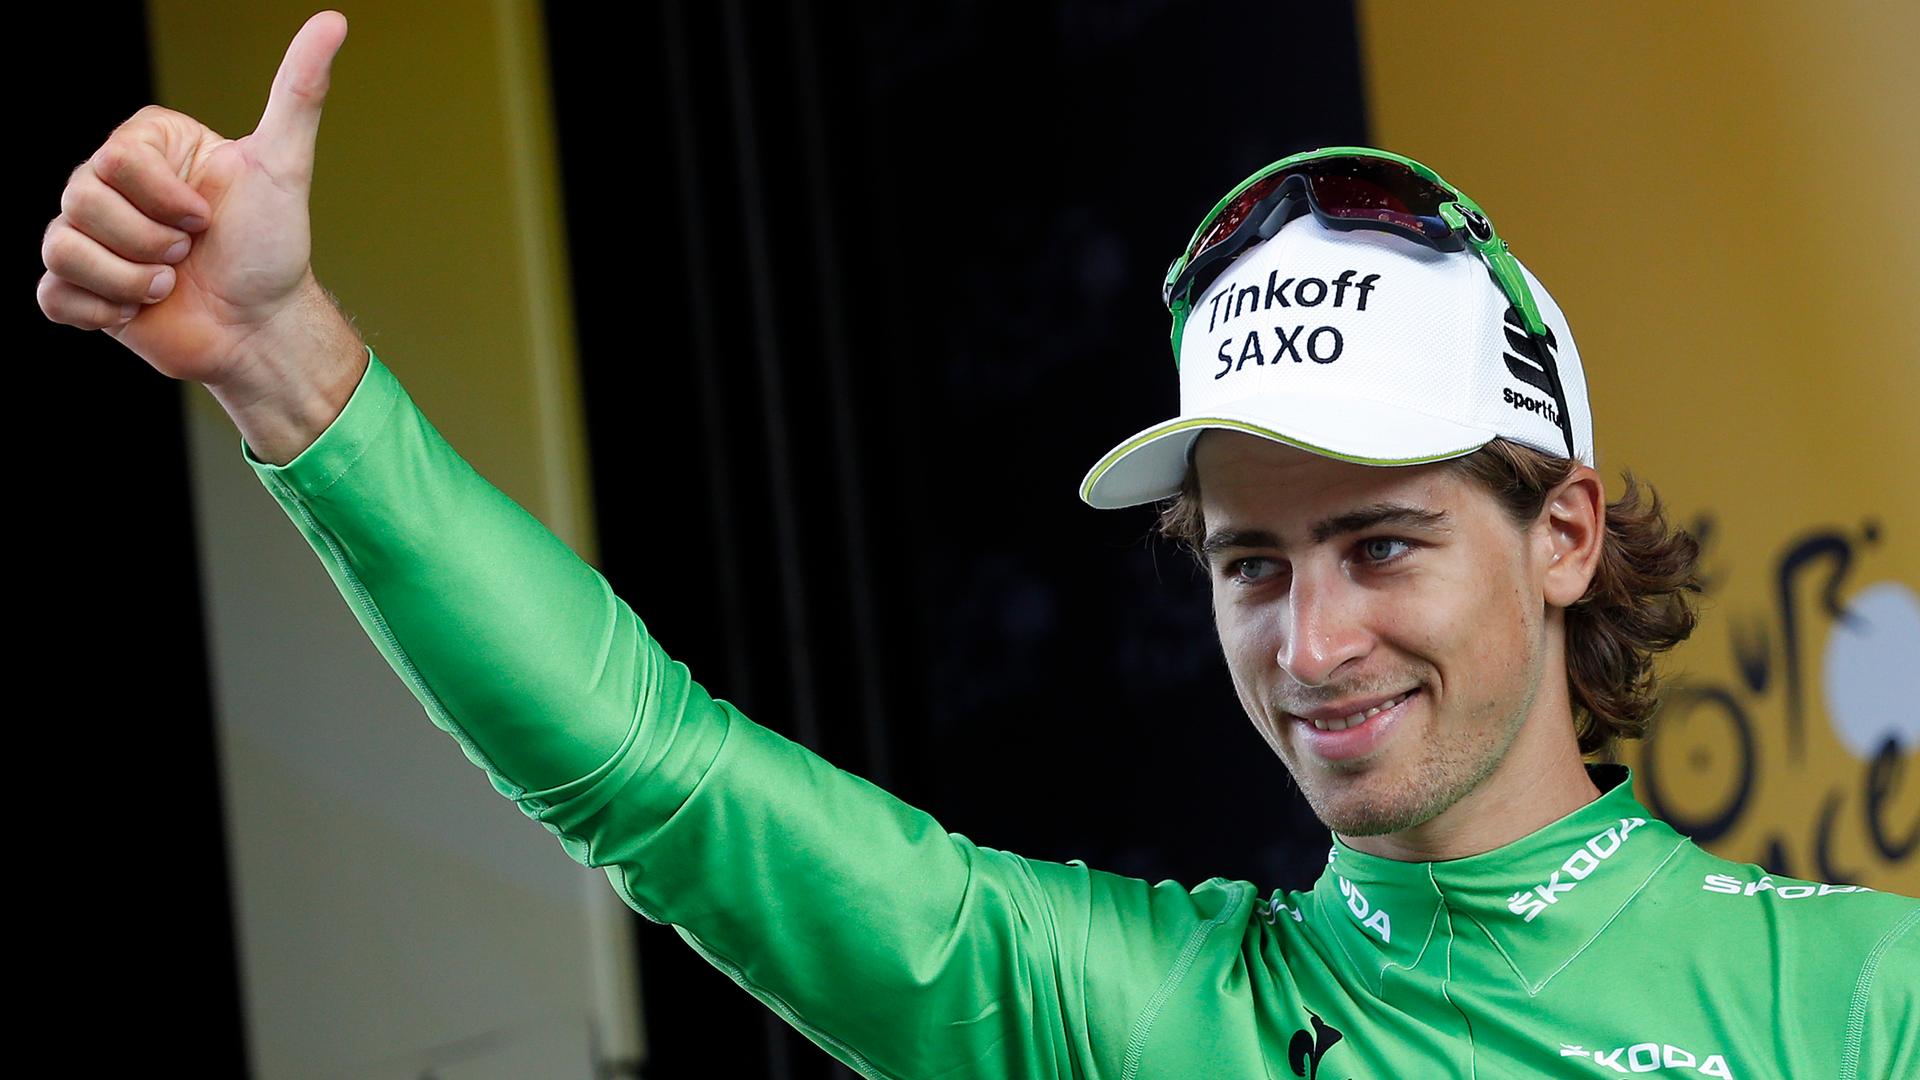 Tinkoff-Saxo rider Peter Sagan of Slovakia gives a thumb up as he wears the green best sprinter jersey on the podium after the 201-km ( 124 miles) 16th stage of the 102nd Tour de France cycling race from Bourg-de-Peage to Gap, France, July 20, 2015.